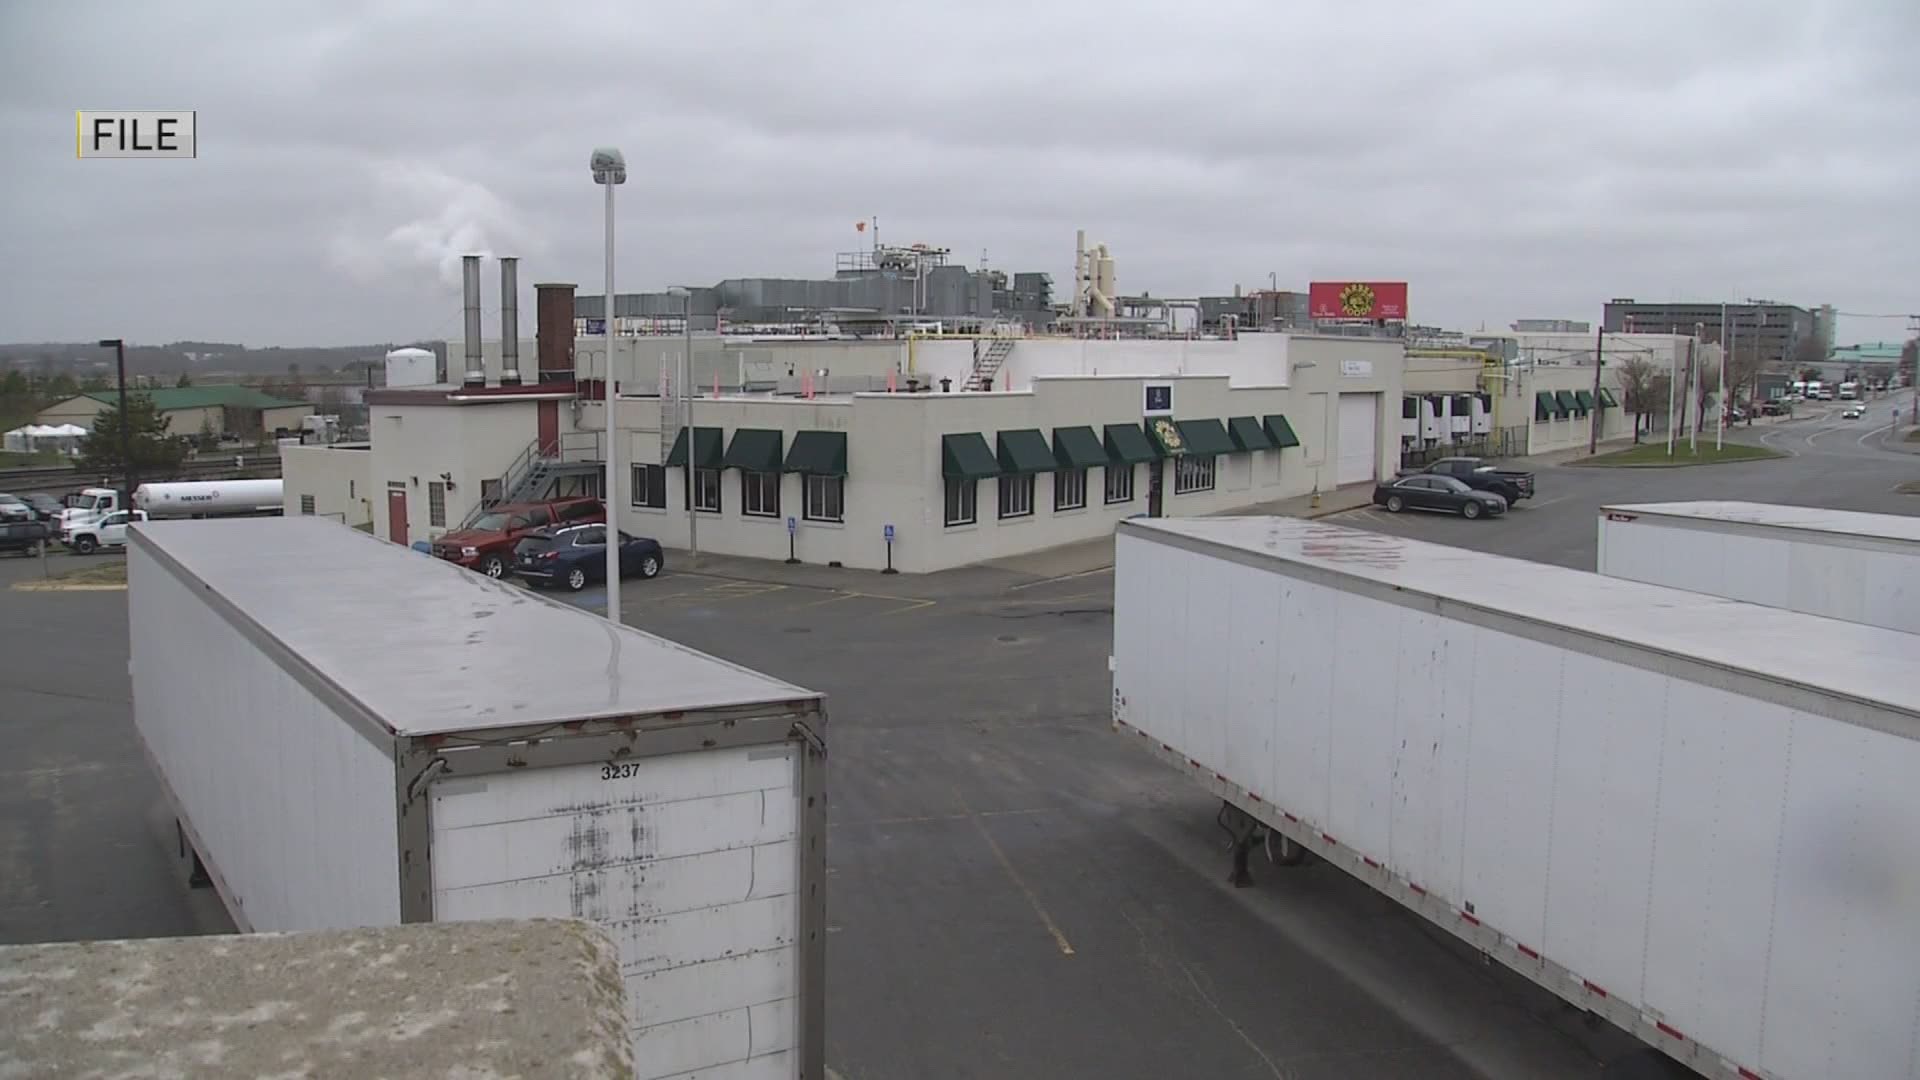 More than 50 COVID-19 cases confirmed at Tyson food plant in Portland